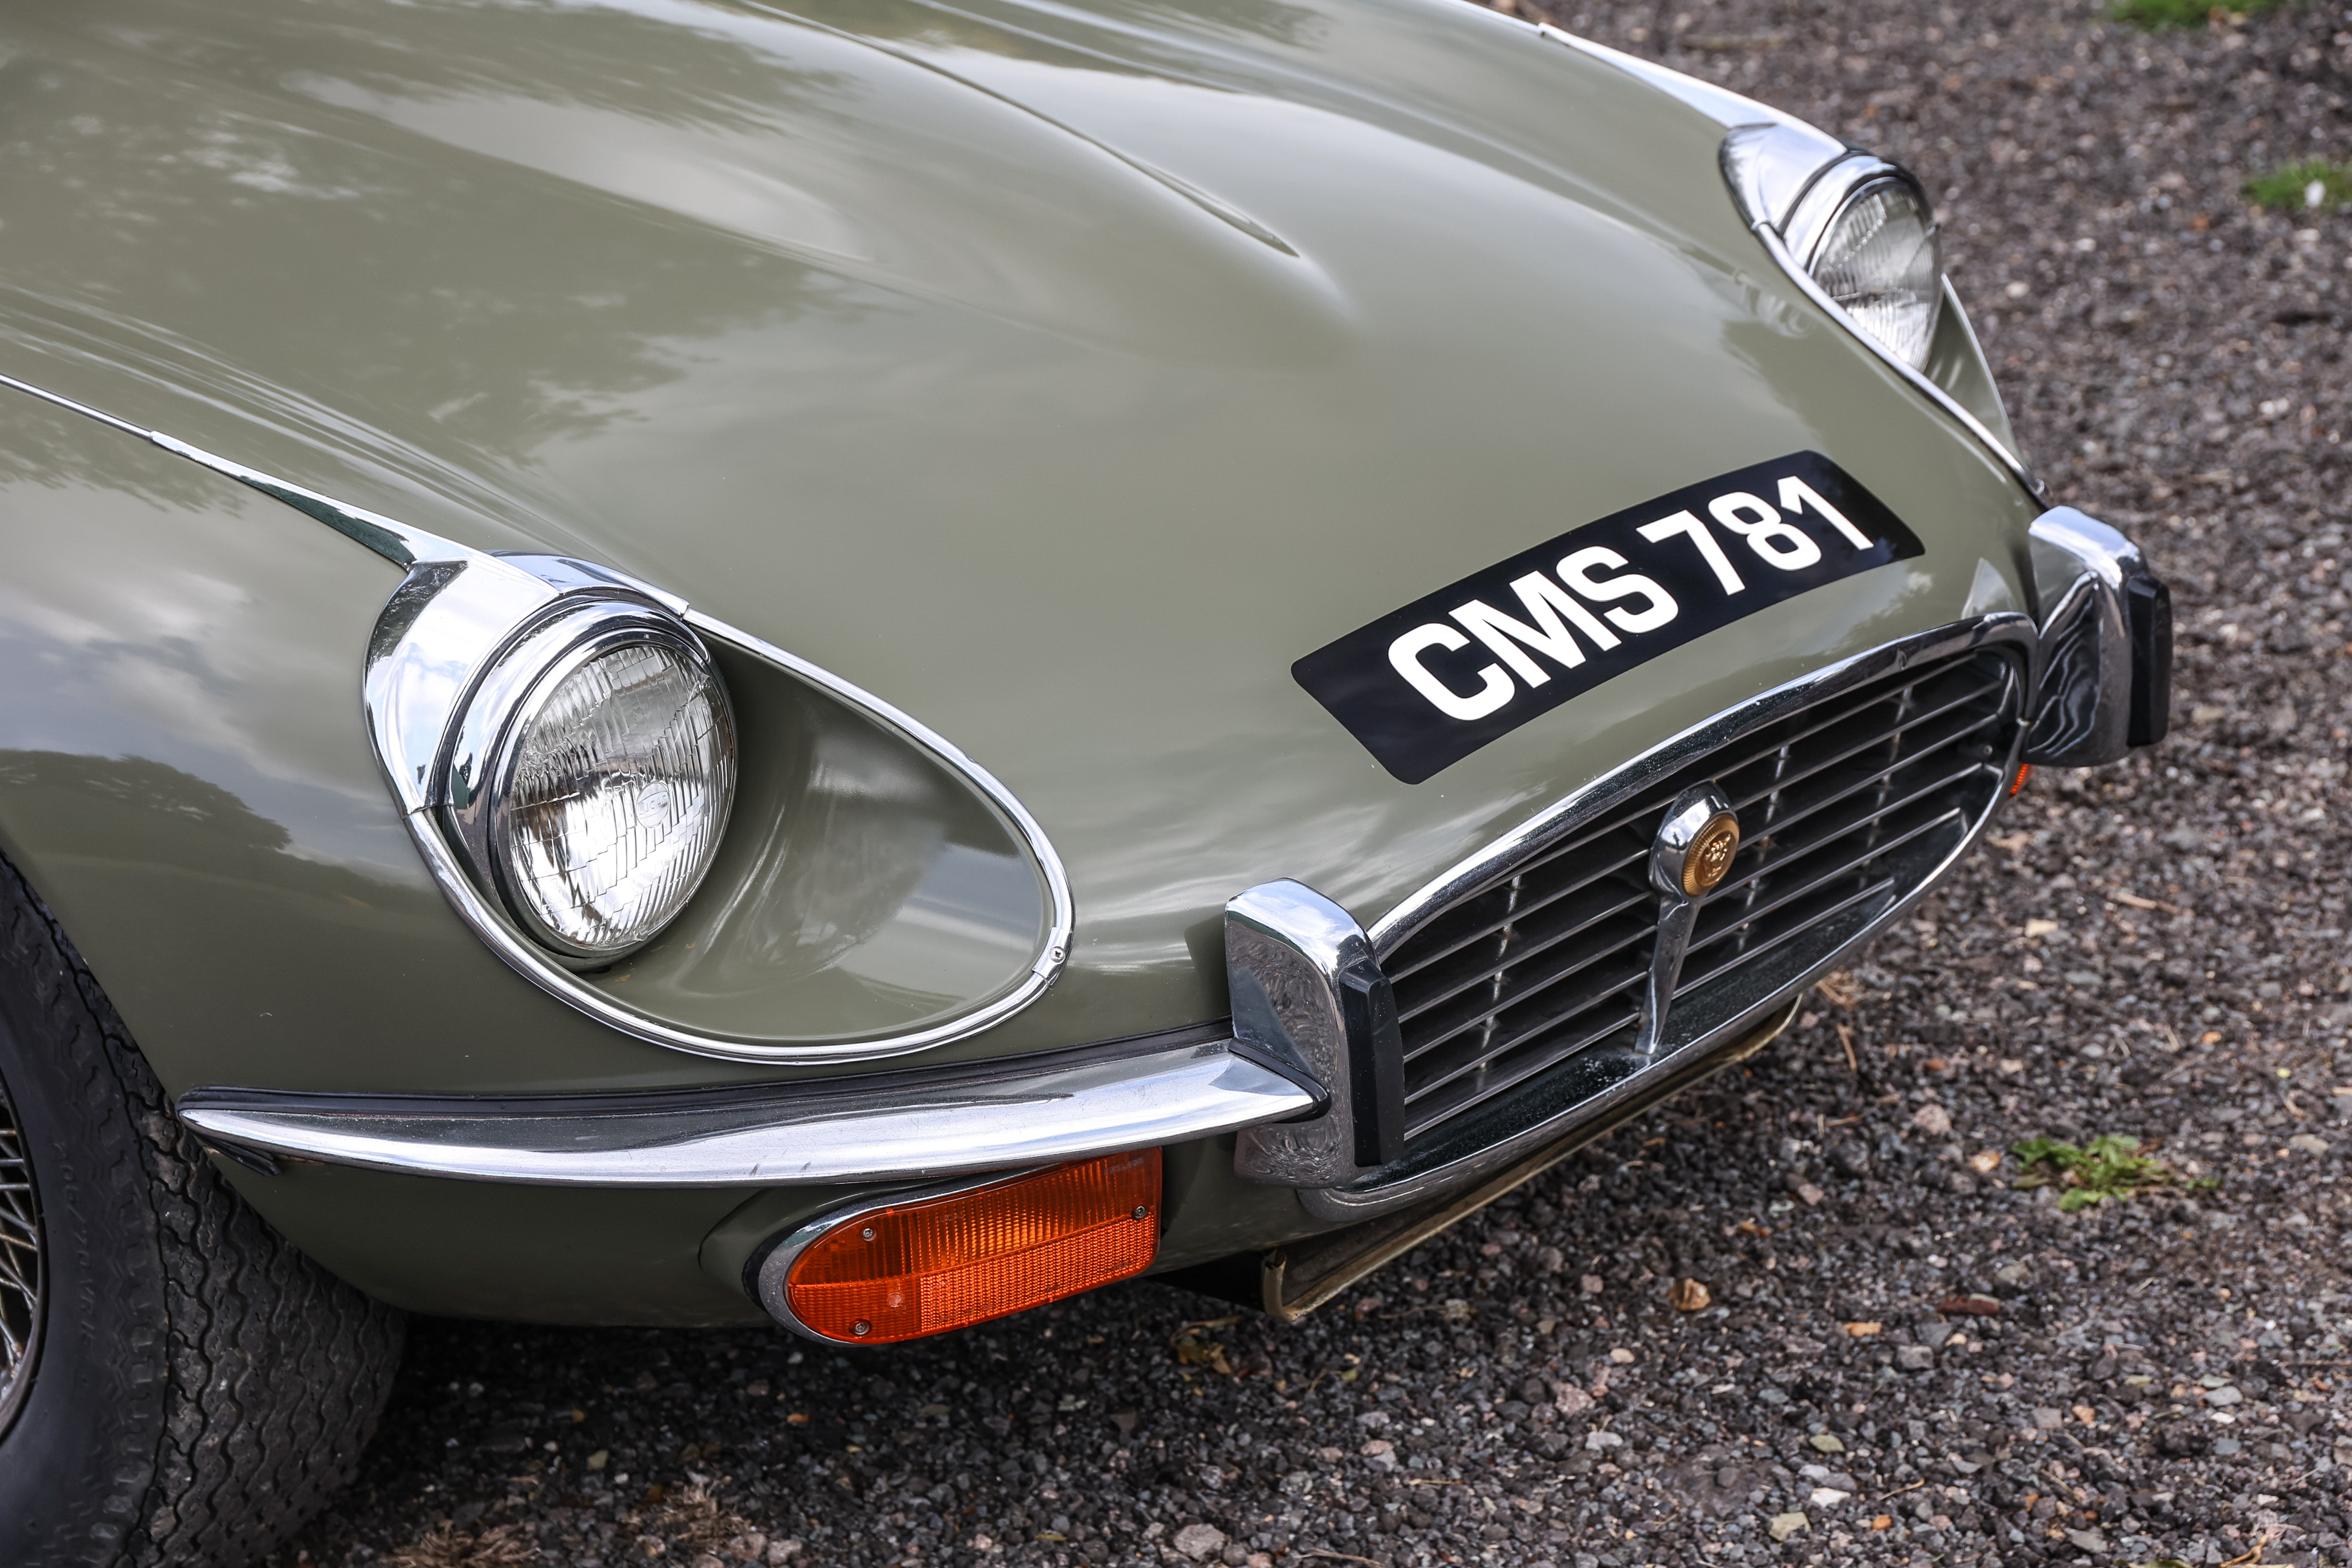 1973 JAGUAR E-TYPE SERIES III ROADSTER Registration Number: CMS 781 Chassis Number: 1S1868 - Image 12 of 22